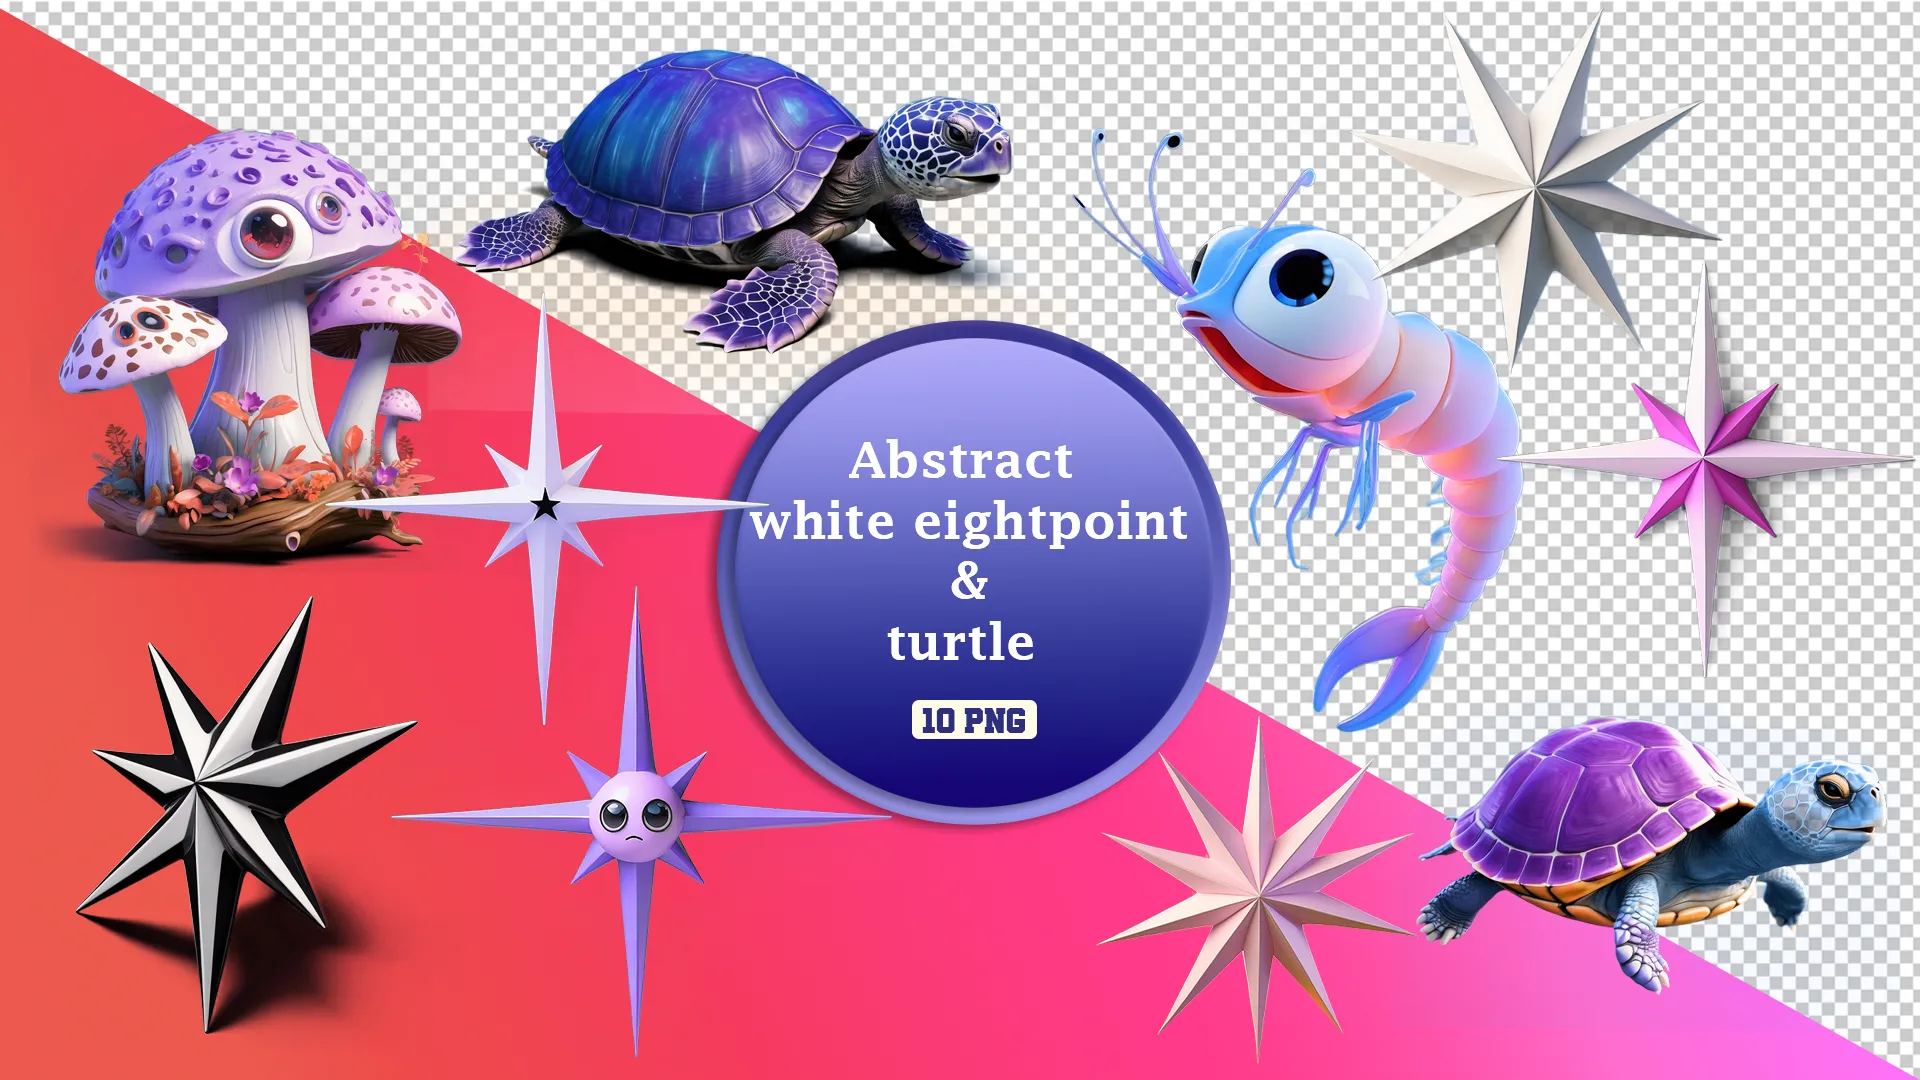 Cheerful Turtles and Magical Starburst 3D Design Pack image